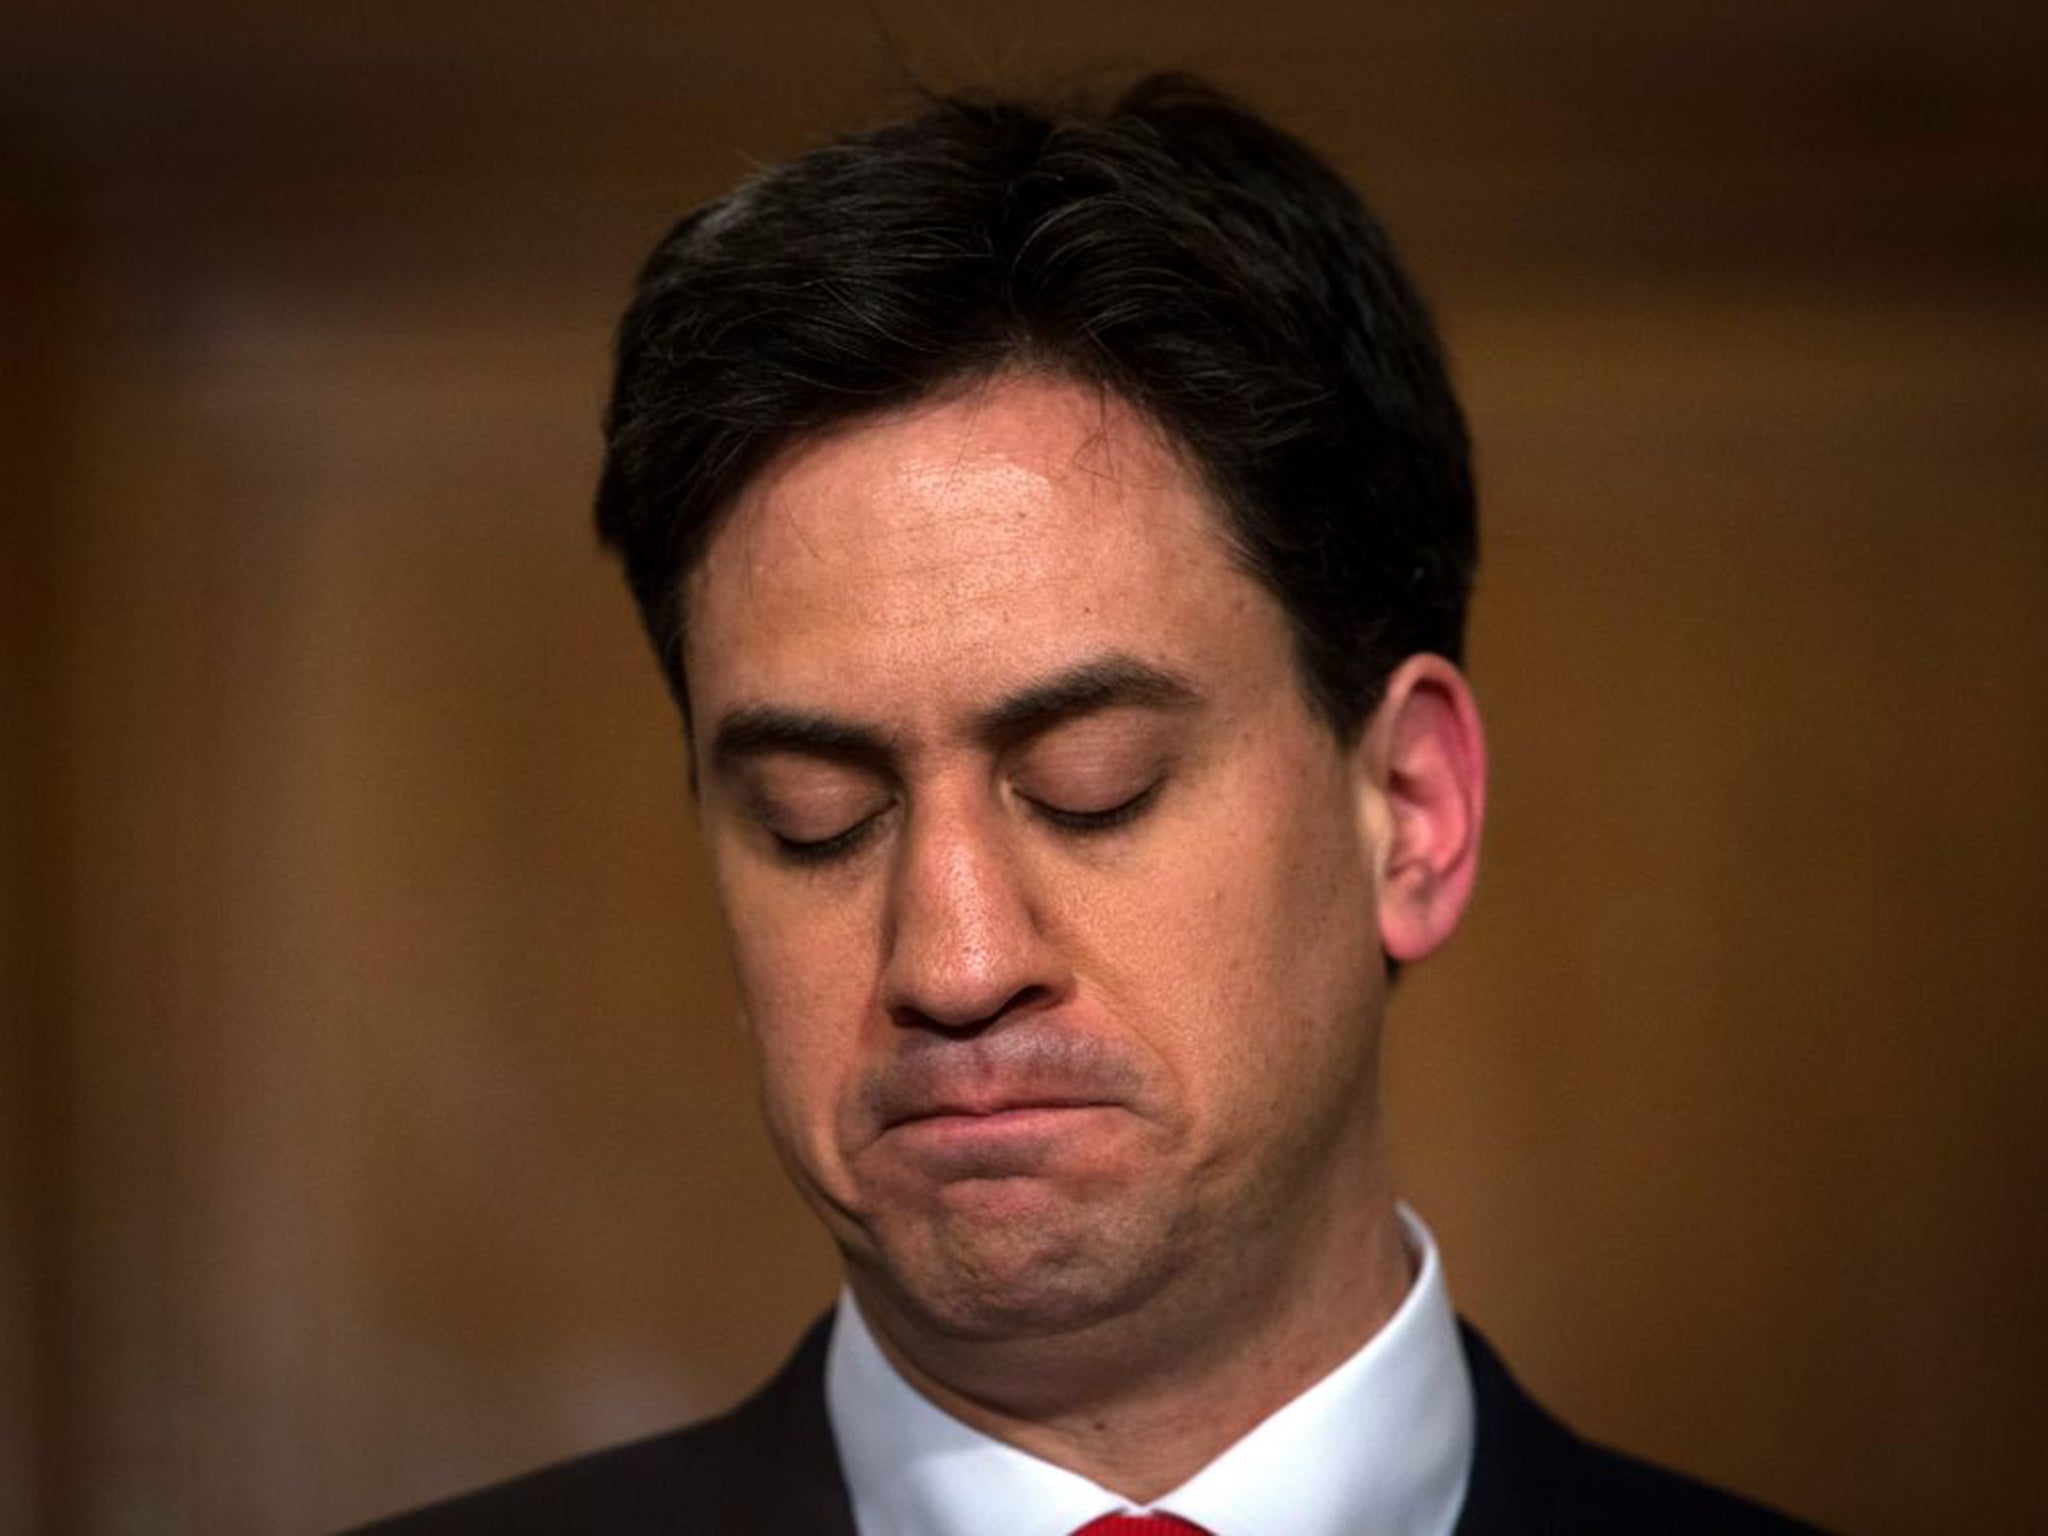 Labour leader Ed Miliband was on course to become Prime MInister, according to polls at the time